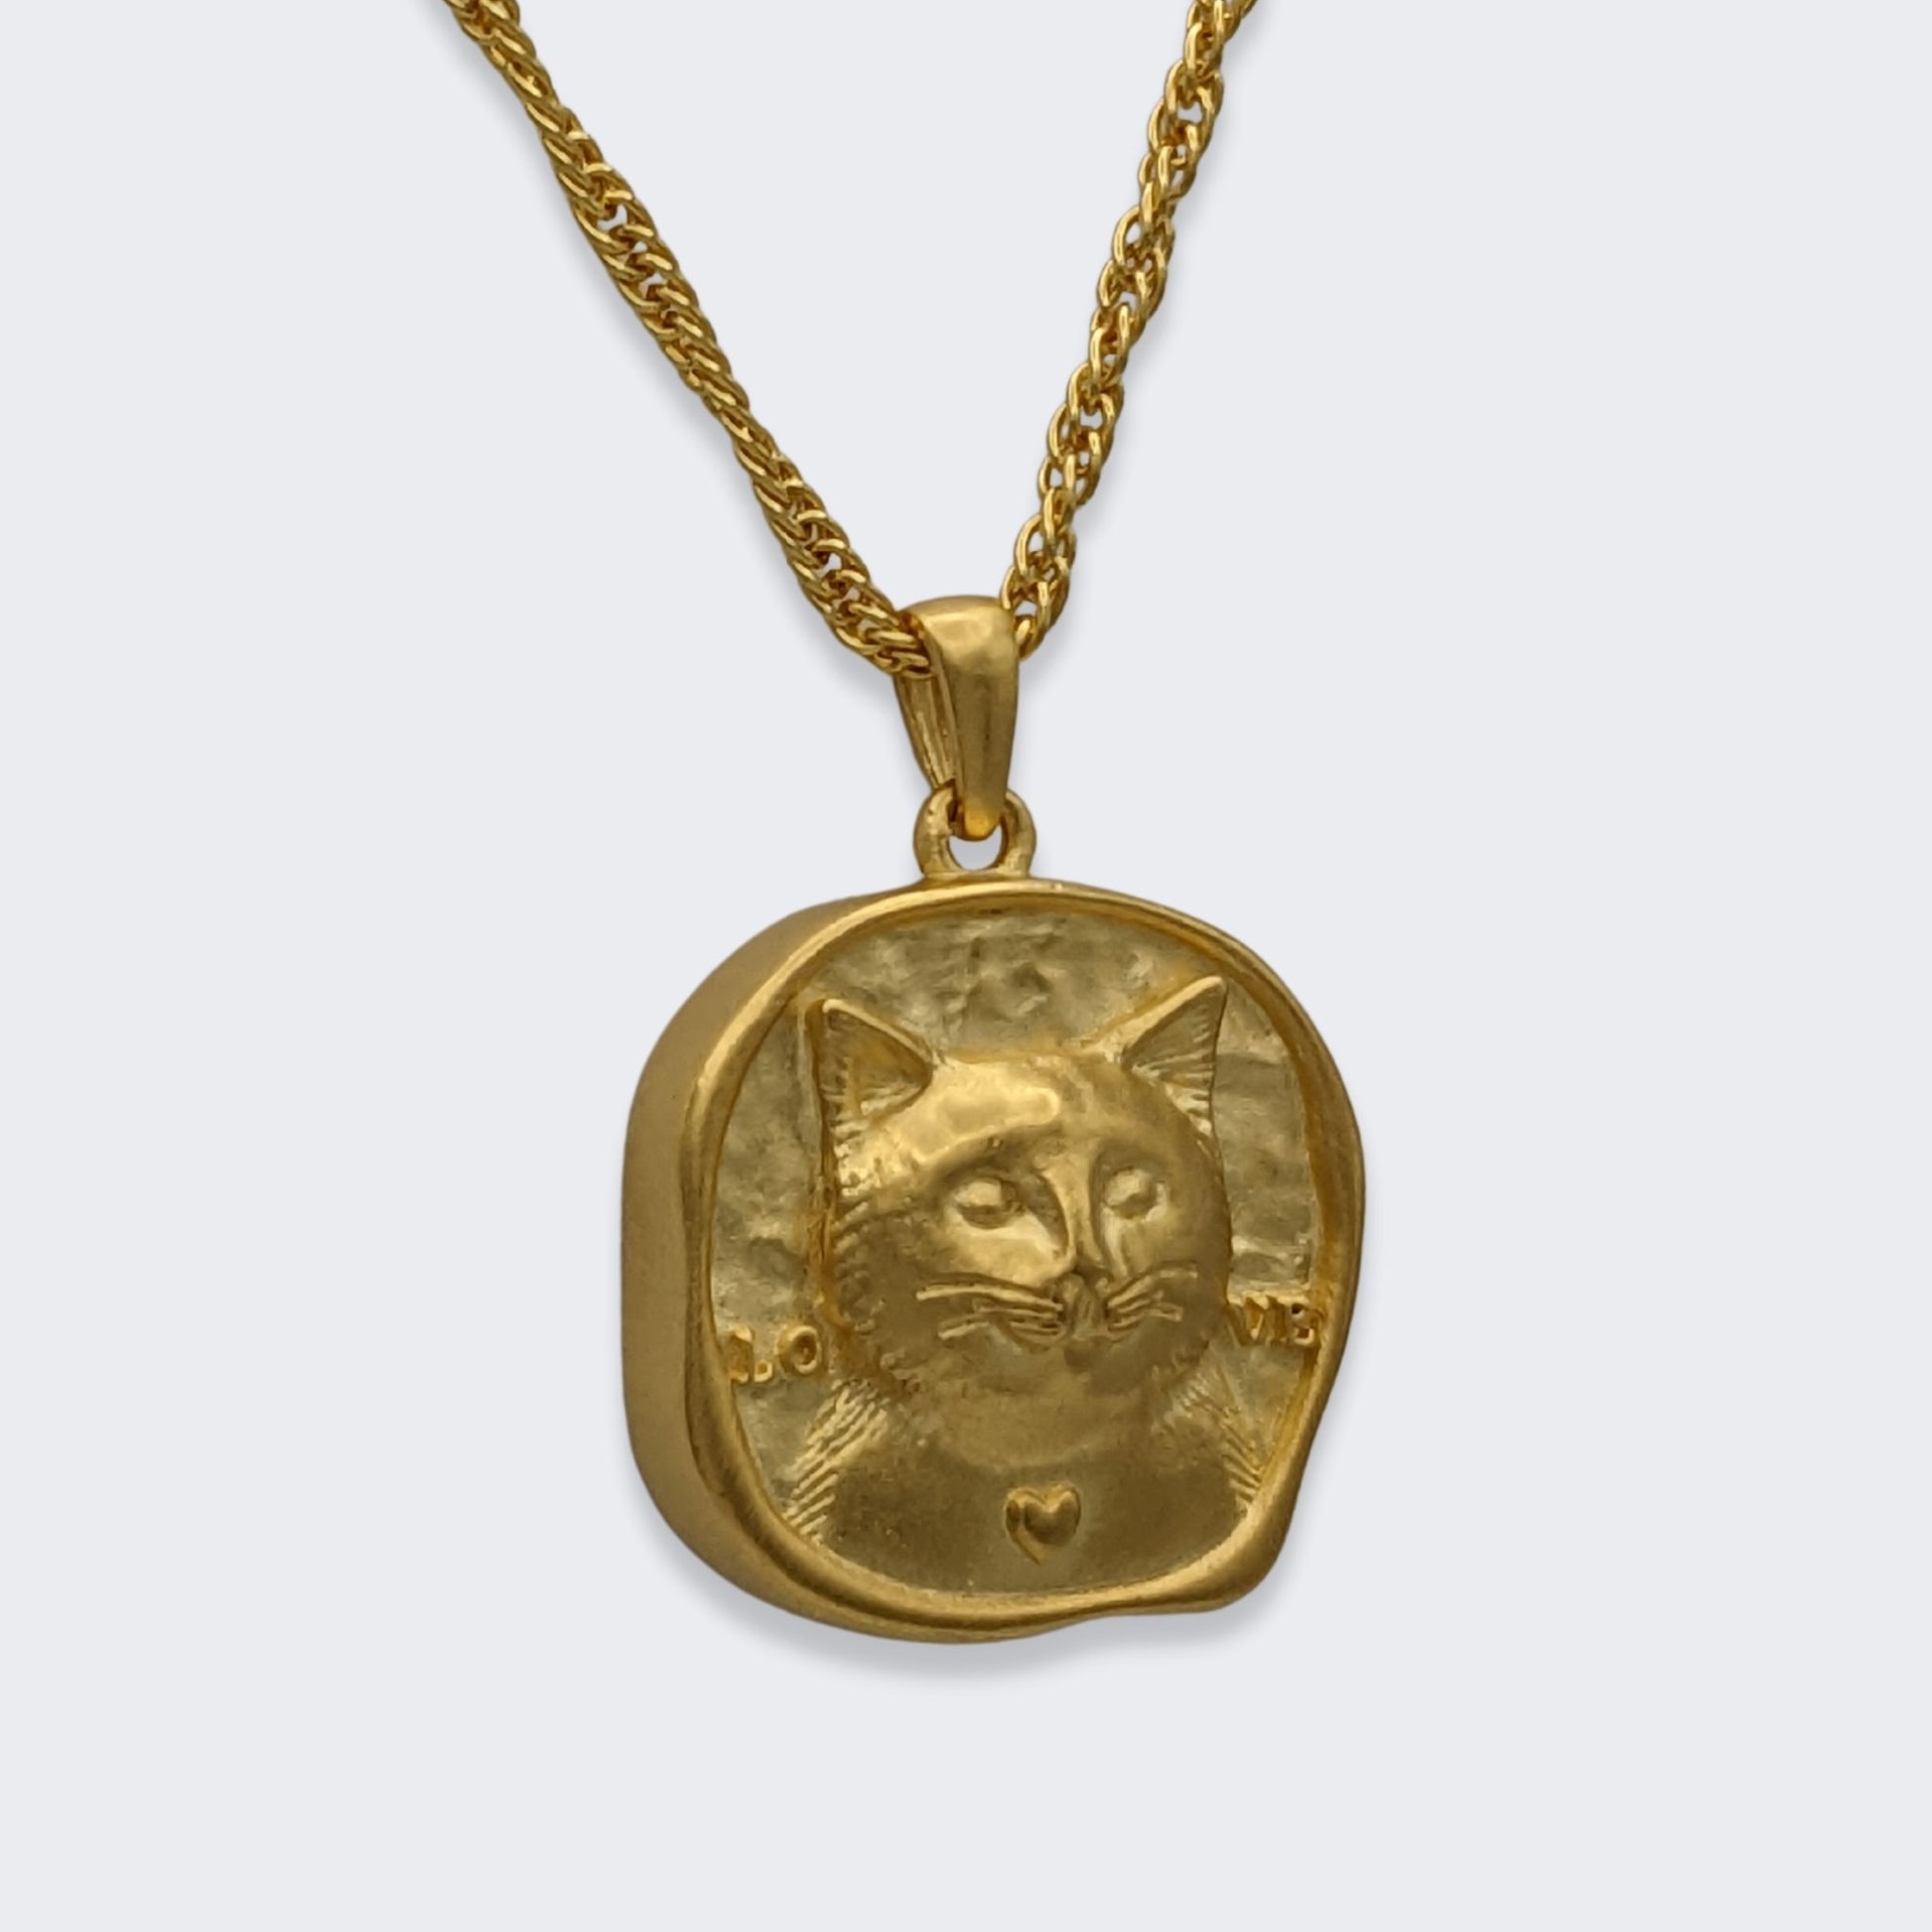 lars reversible cat coin necklace in 18k gold vermeil (right side view)